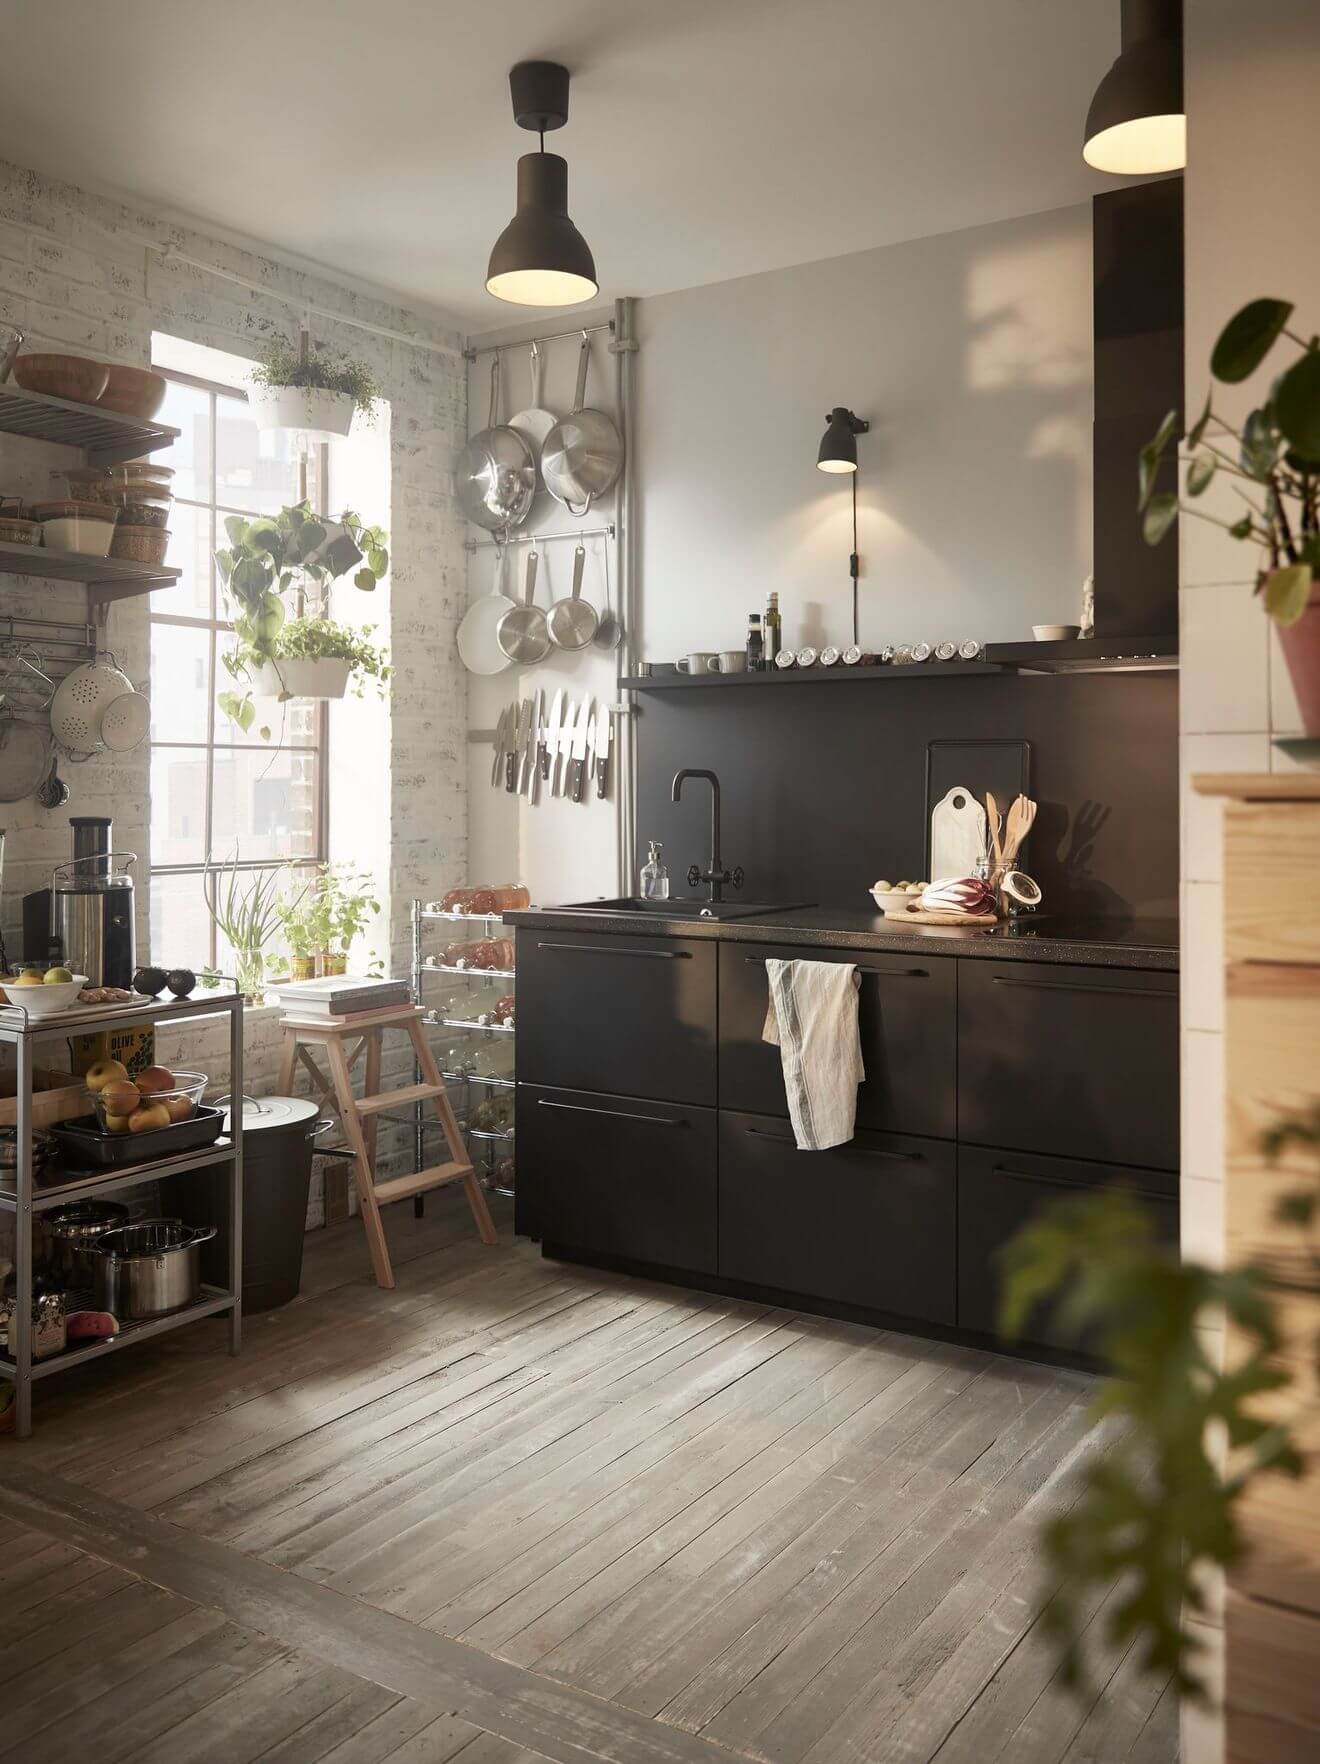 6- An industrial character for the matte black kitchen 